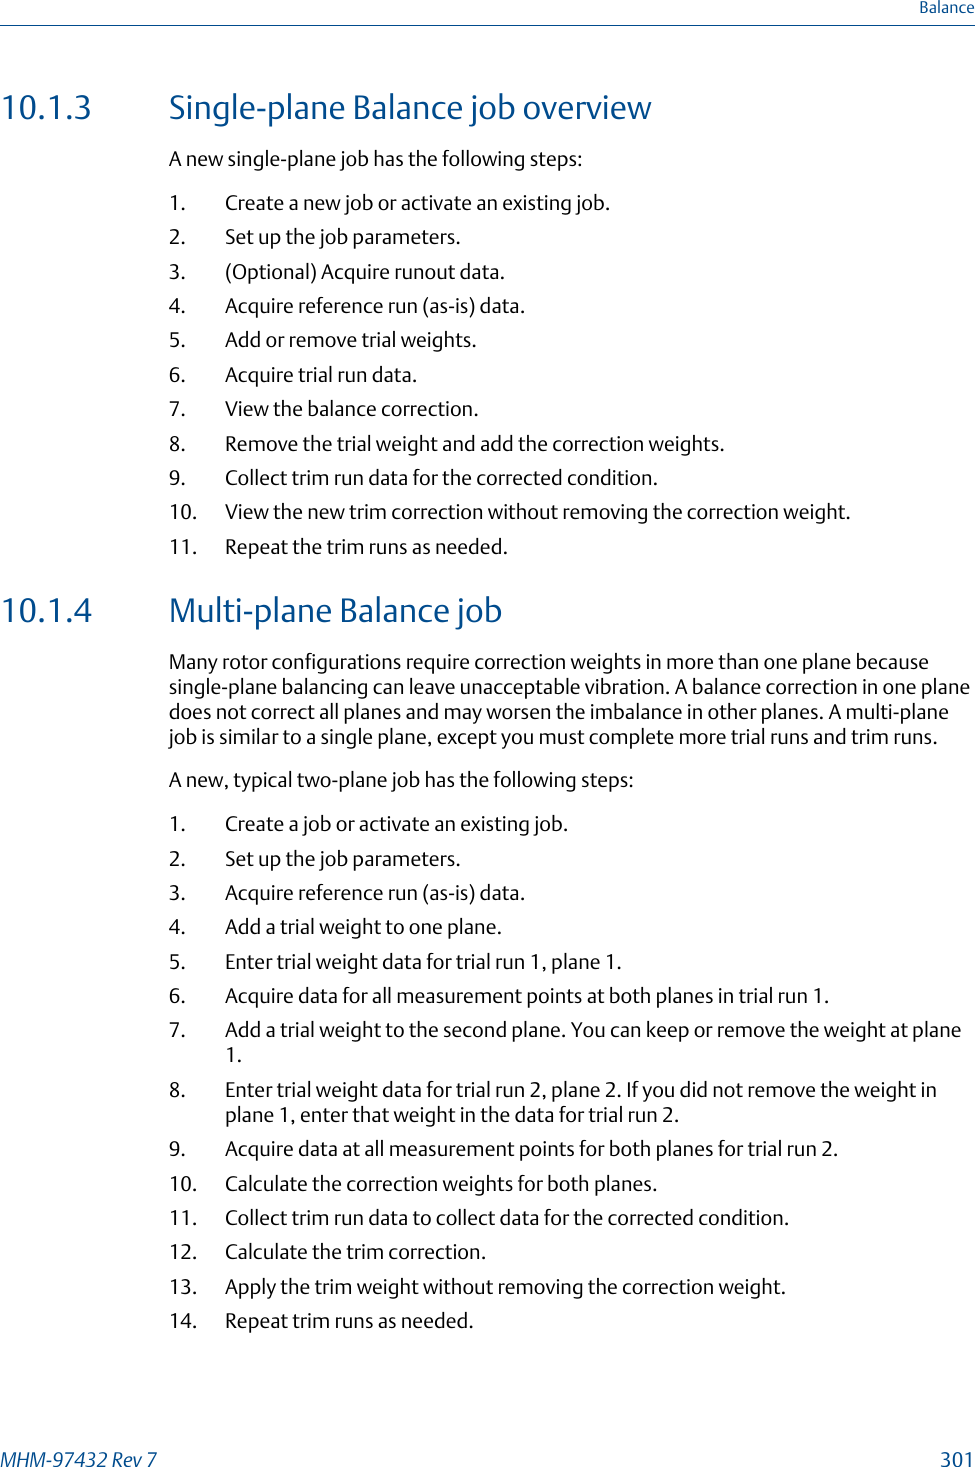 10.1.3 Single-plane Balance job overviewA new single-plane job has the following steps:1. Create a new job or activate an existing job.2. Set up the job parameters.3. (Optional) Acquire runout data.4. Acquire reference run (as-is) data.5. Add or remove trial weights.6. Acquire trial run data.7. View the balance correction.8. Remove the trial weight and add the correction weights.9. Collect trim run data for the corrected condition.10. View the new trim correction without removing the correction weight.11. Repeat the trim runs as needed.10.1.4 Multi-plane Balance jobMany rotor configurations require correction weights in more than one plane becausesingle-plane balancing can leave unacceptable vibration. A balance correction in one planedoes not correct all planes and may worsen the imbalance in other planes. A multi-planejob is similar to a single plane, except you must complete more trial runs and trim runs.A new, typical two-plane job has the following steps:1. Create a job or activate an existing job.2. Set up the job parameters.3. Acquire reference run (as-is) data.4. Add a trial weight to one plane.5. Enter trial weight data for trial run 1, plane 1.6. Acquire data for all measurement points at both planes in trial run 1.7. Add a trial weight to the second plane. You can keep or remove the weight at plane1.8. Enter trial weight data for trial run 2, plane 2. If you did not remove the weight inplane 1, enter that weight in the data for trial run 2.9. Acquire data at all measurement points for both planes for trial run 2.10. Calculate the correction weights for both planes.11. Collect trim run data to collect data for the corrected condition.12. Calculate the trim correction.13. Apply the trim weight without removing the correction weight.14. Repeat trim runs as needed.BalanceMHM-97432 Rev 7  301